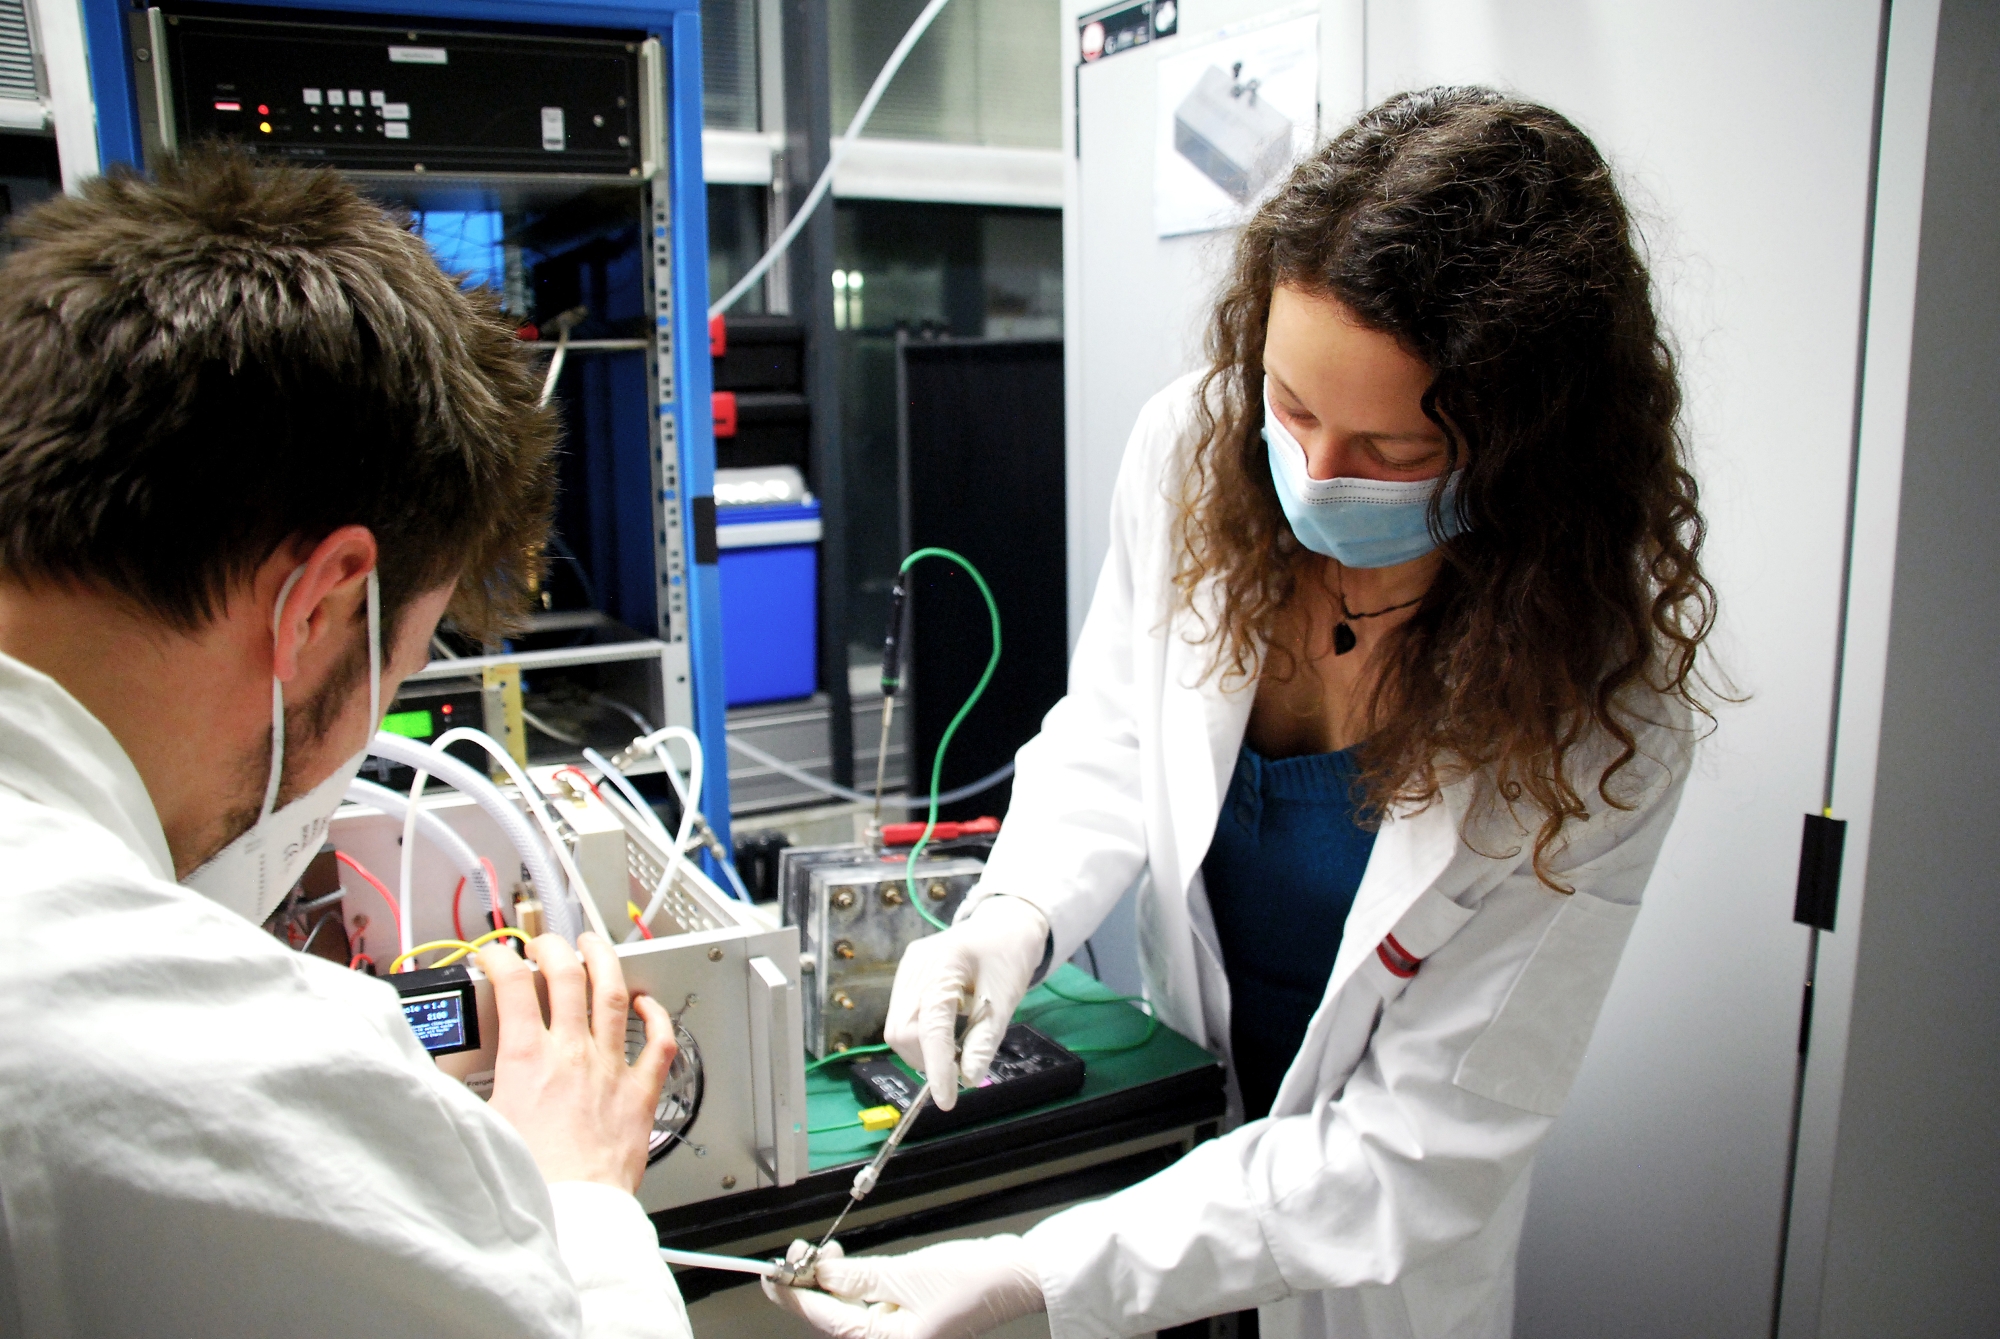 Stephan Renninger and Maike Lambarth (from left) working in the laboratory at the plasma reactor.